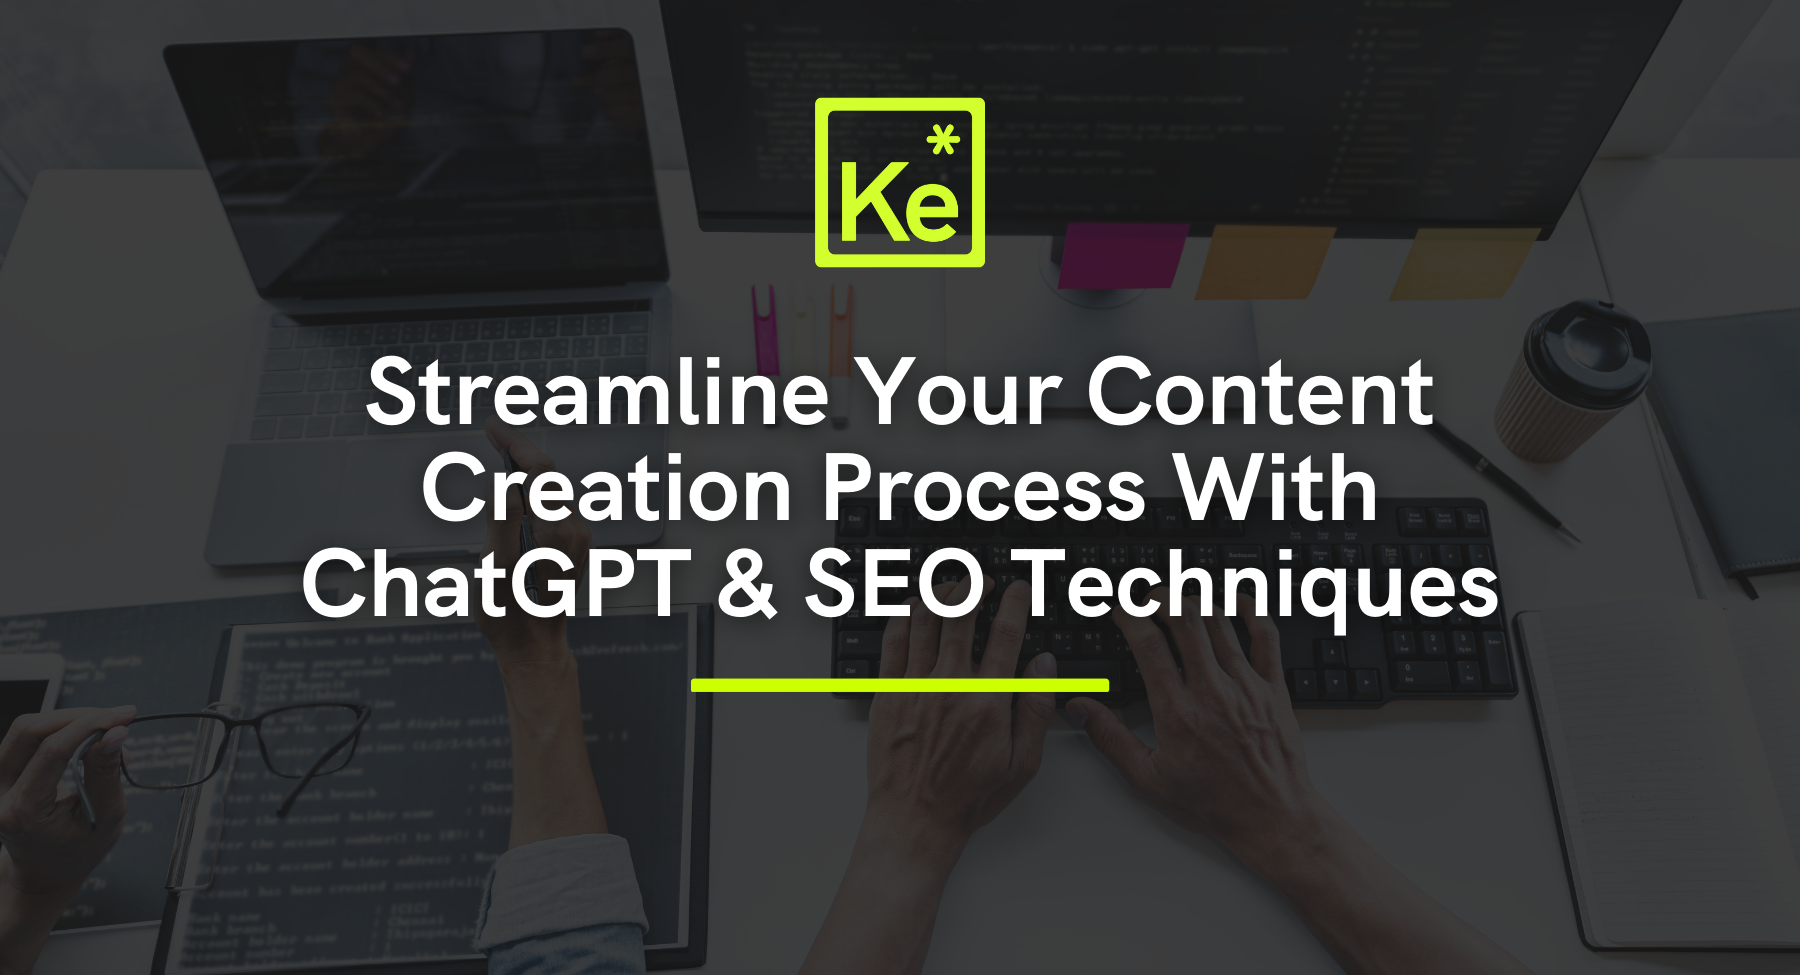 Streamline Your Content Creation Process With ChatGPT and SEO Techniques